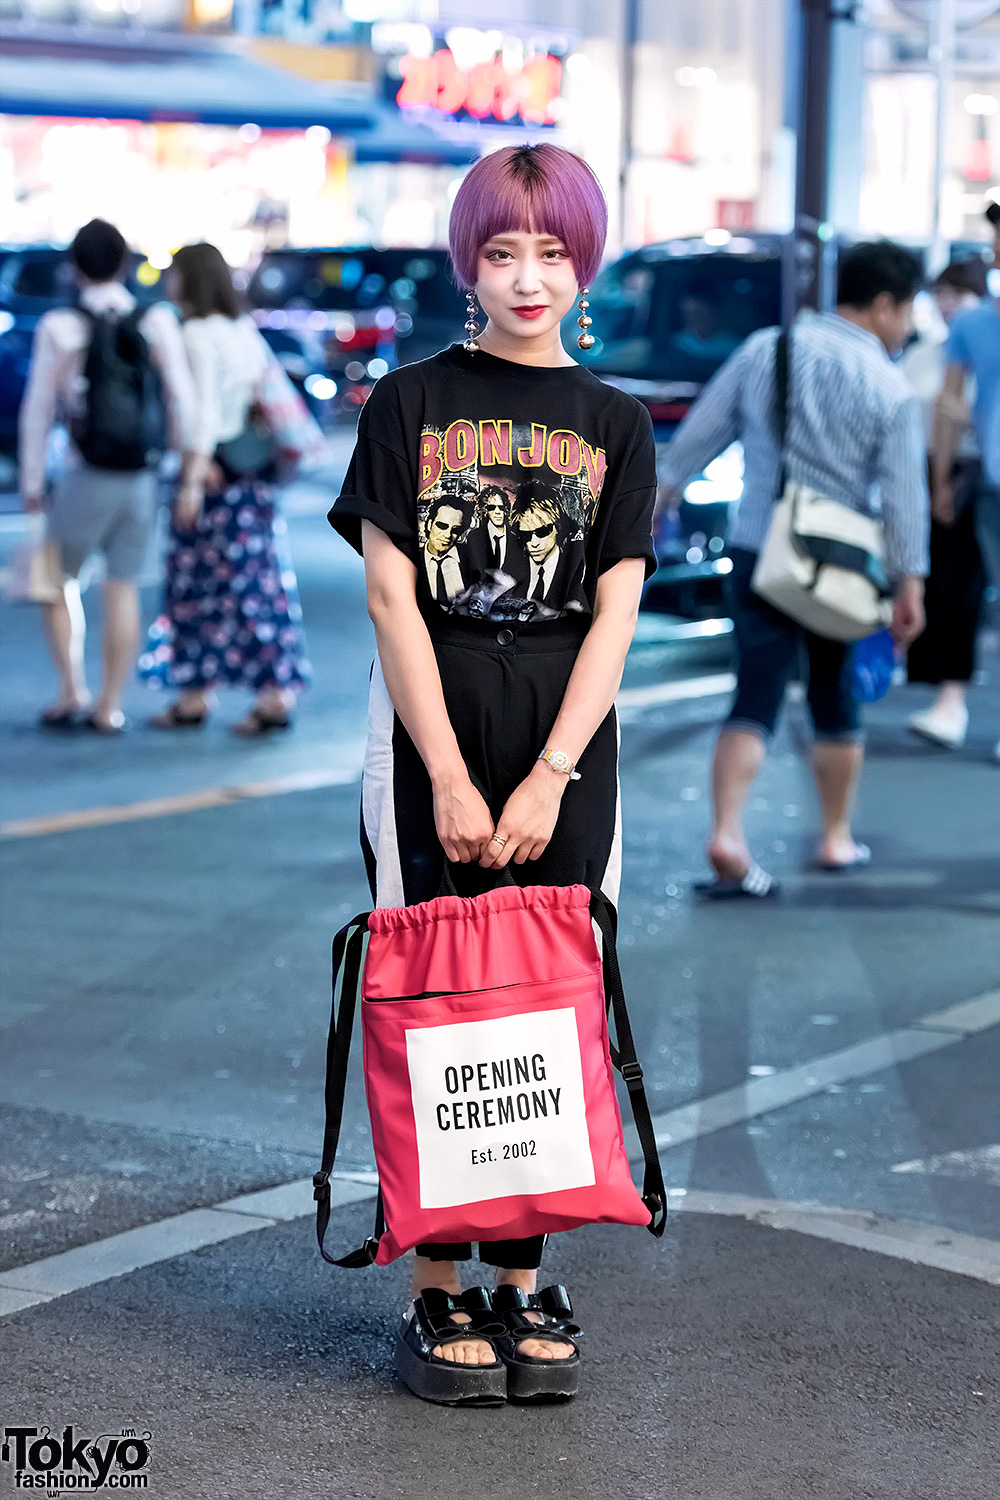 Pink Haired Student in Harajuku w/ Bon Jovi Tee & Opening Ceremony Bag